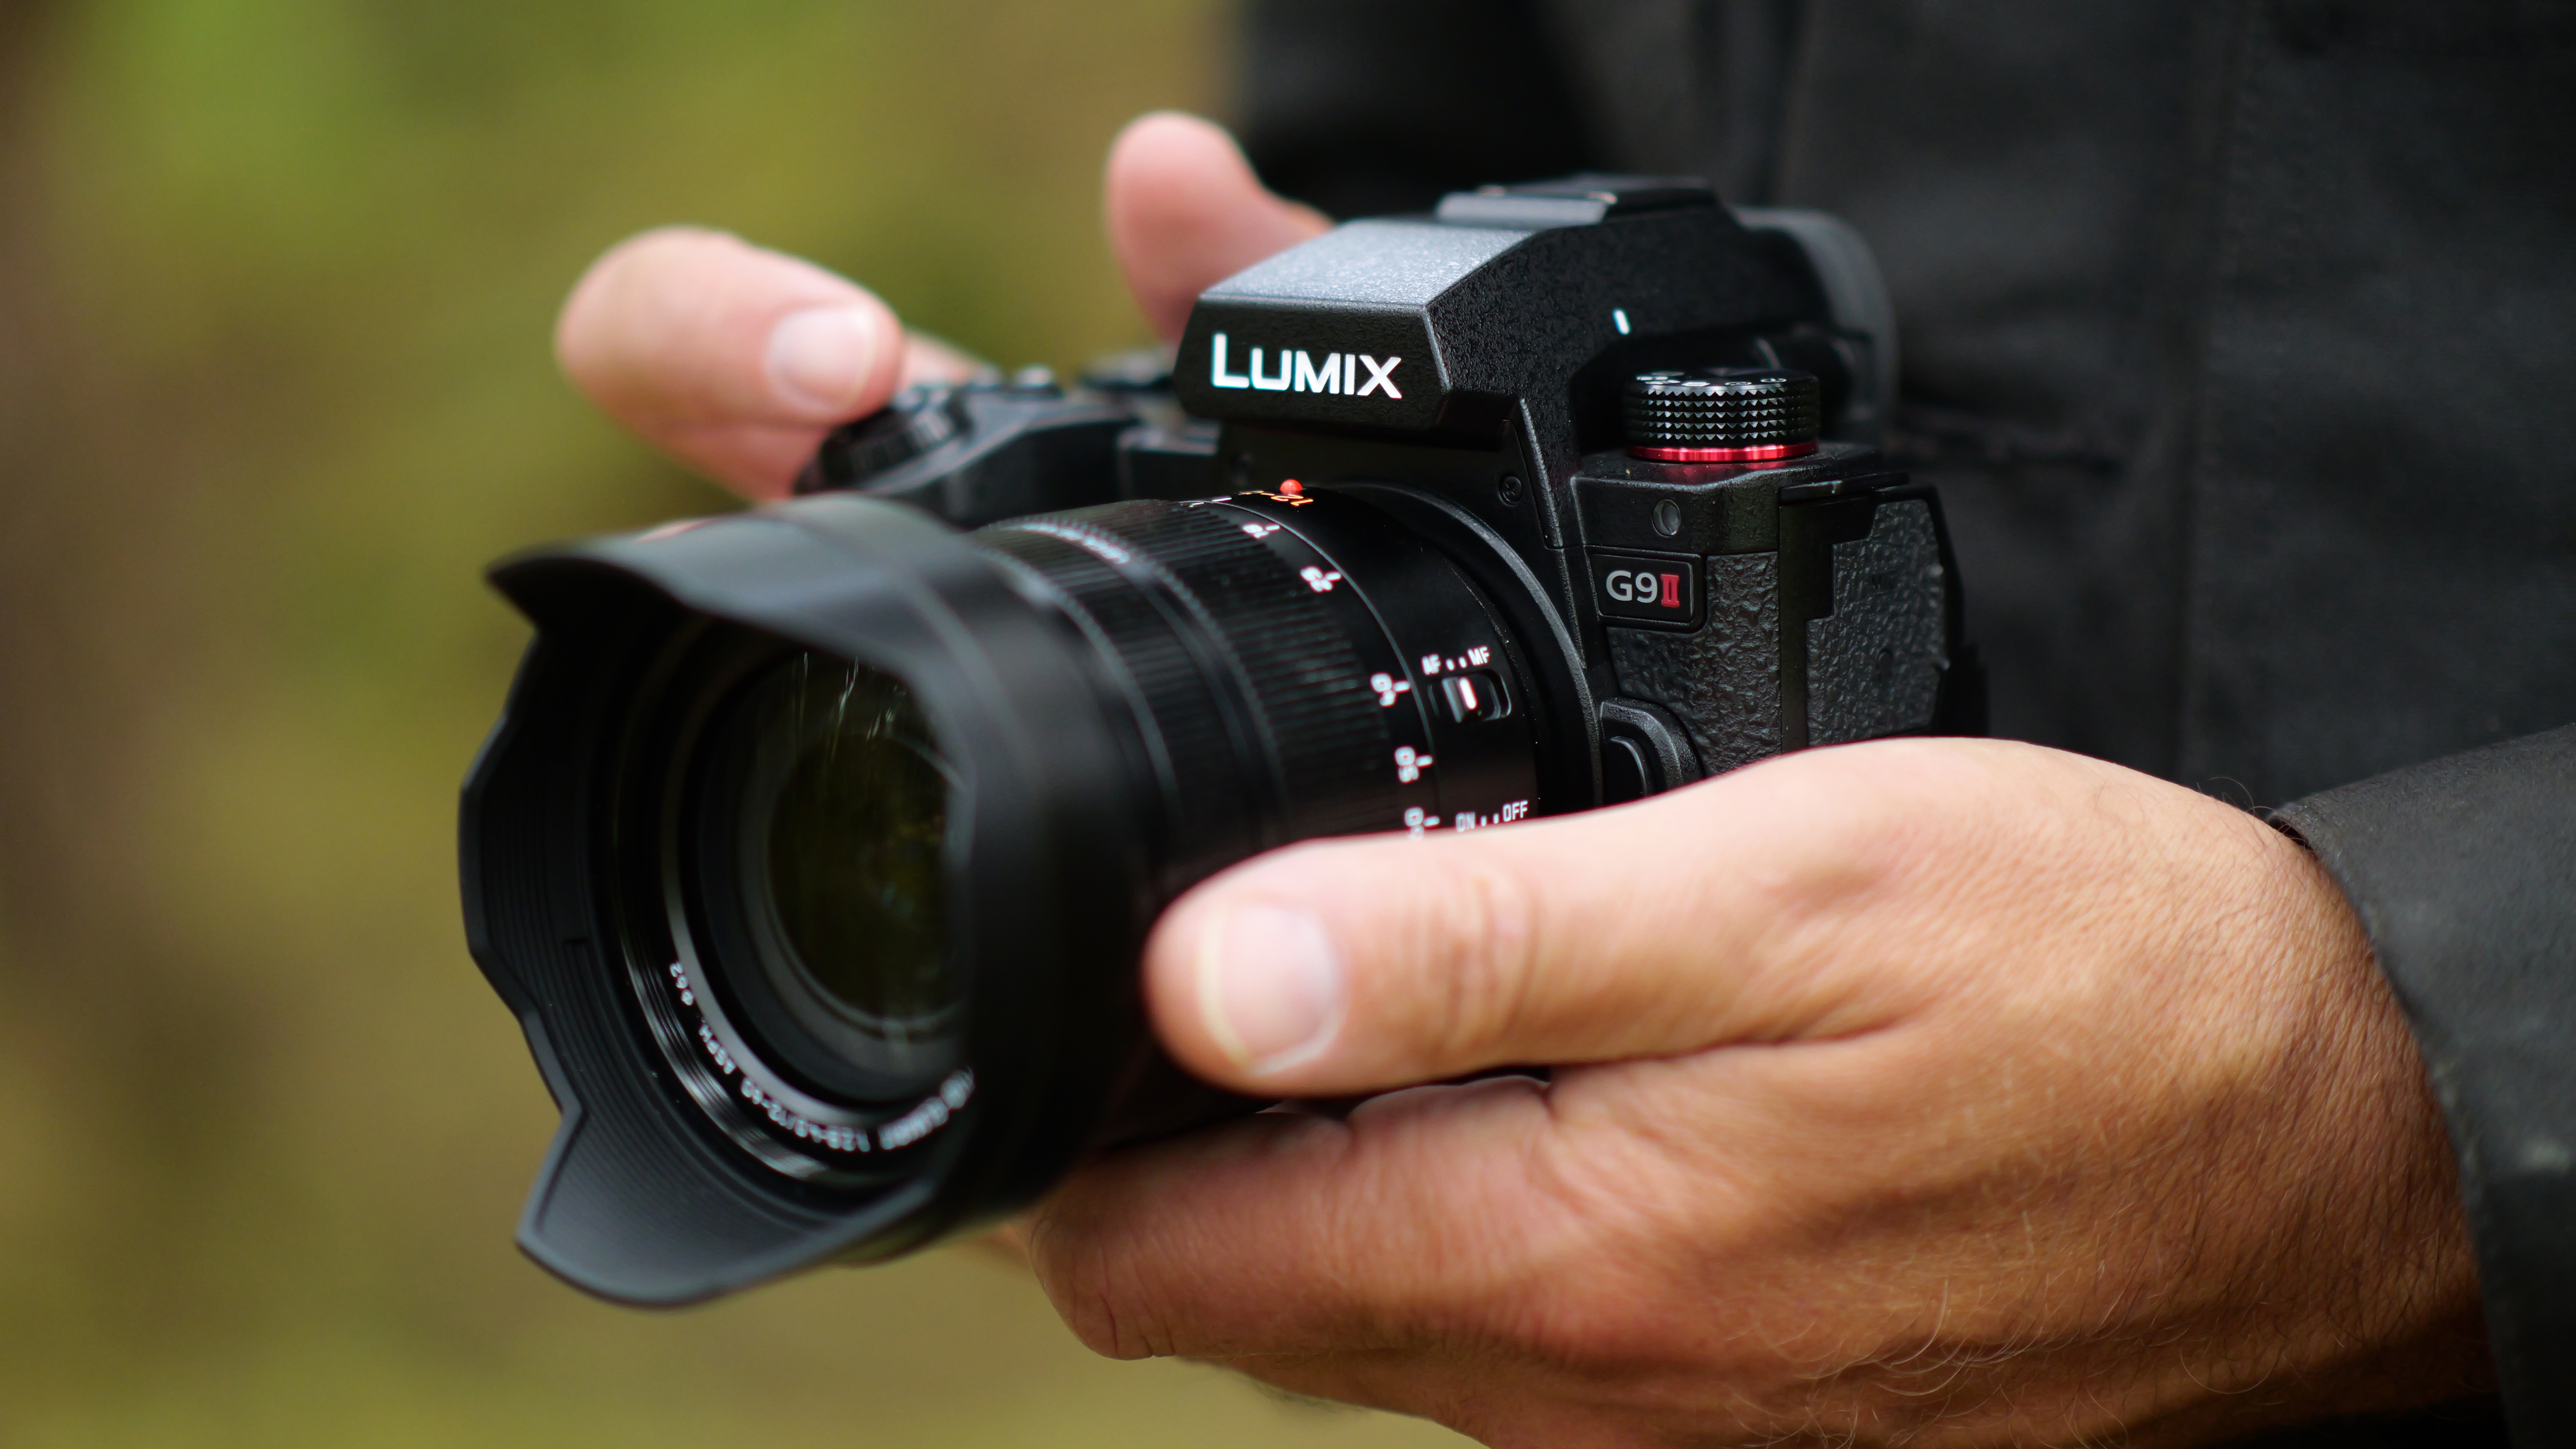 Panasonic returns to Micro Four Thirds with the new Lumix G9 II